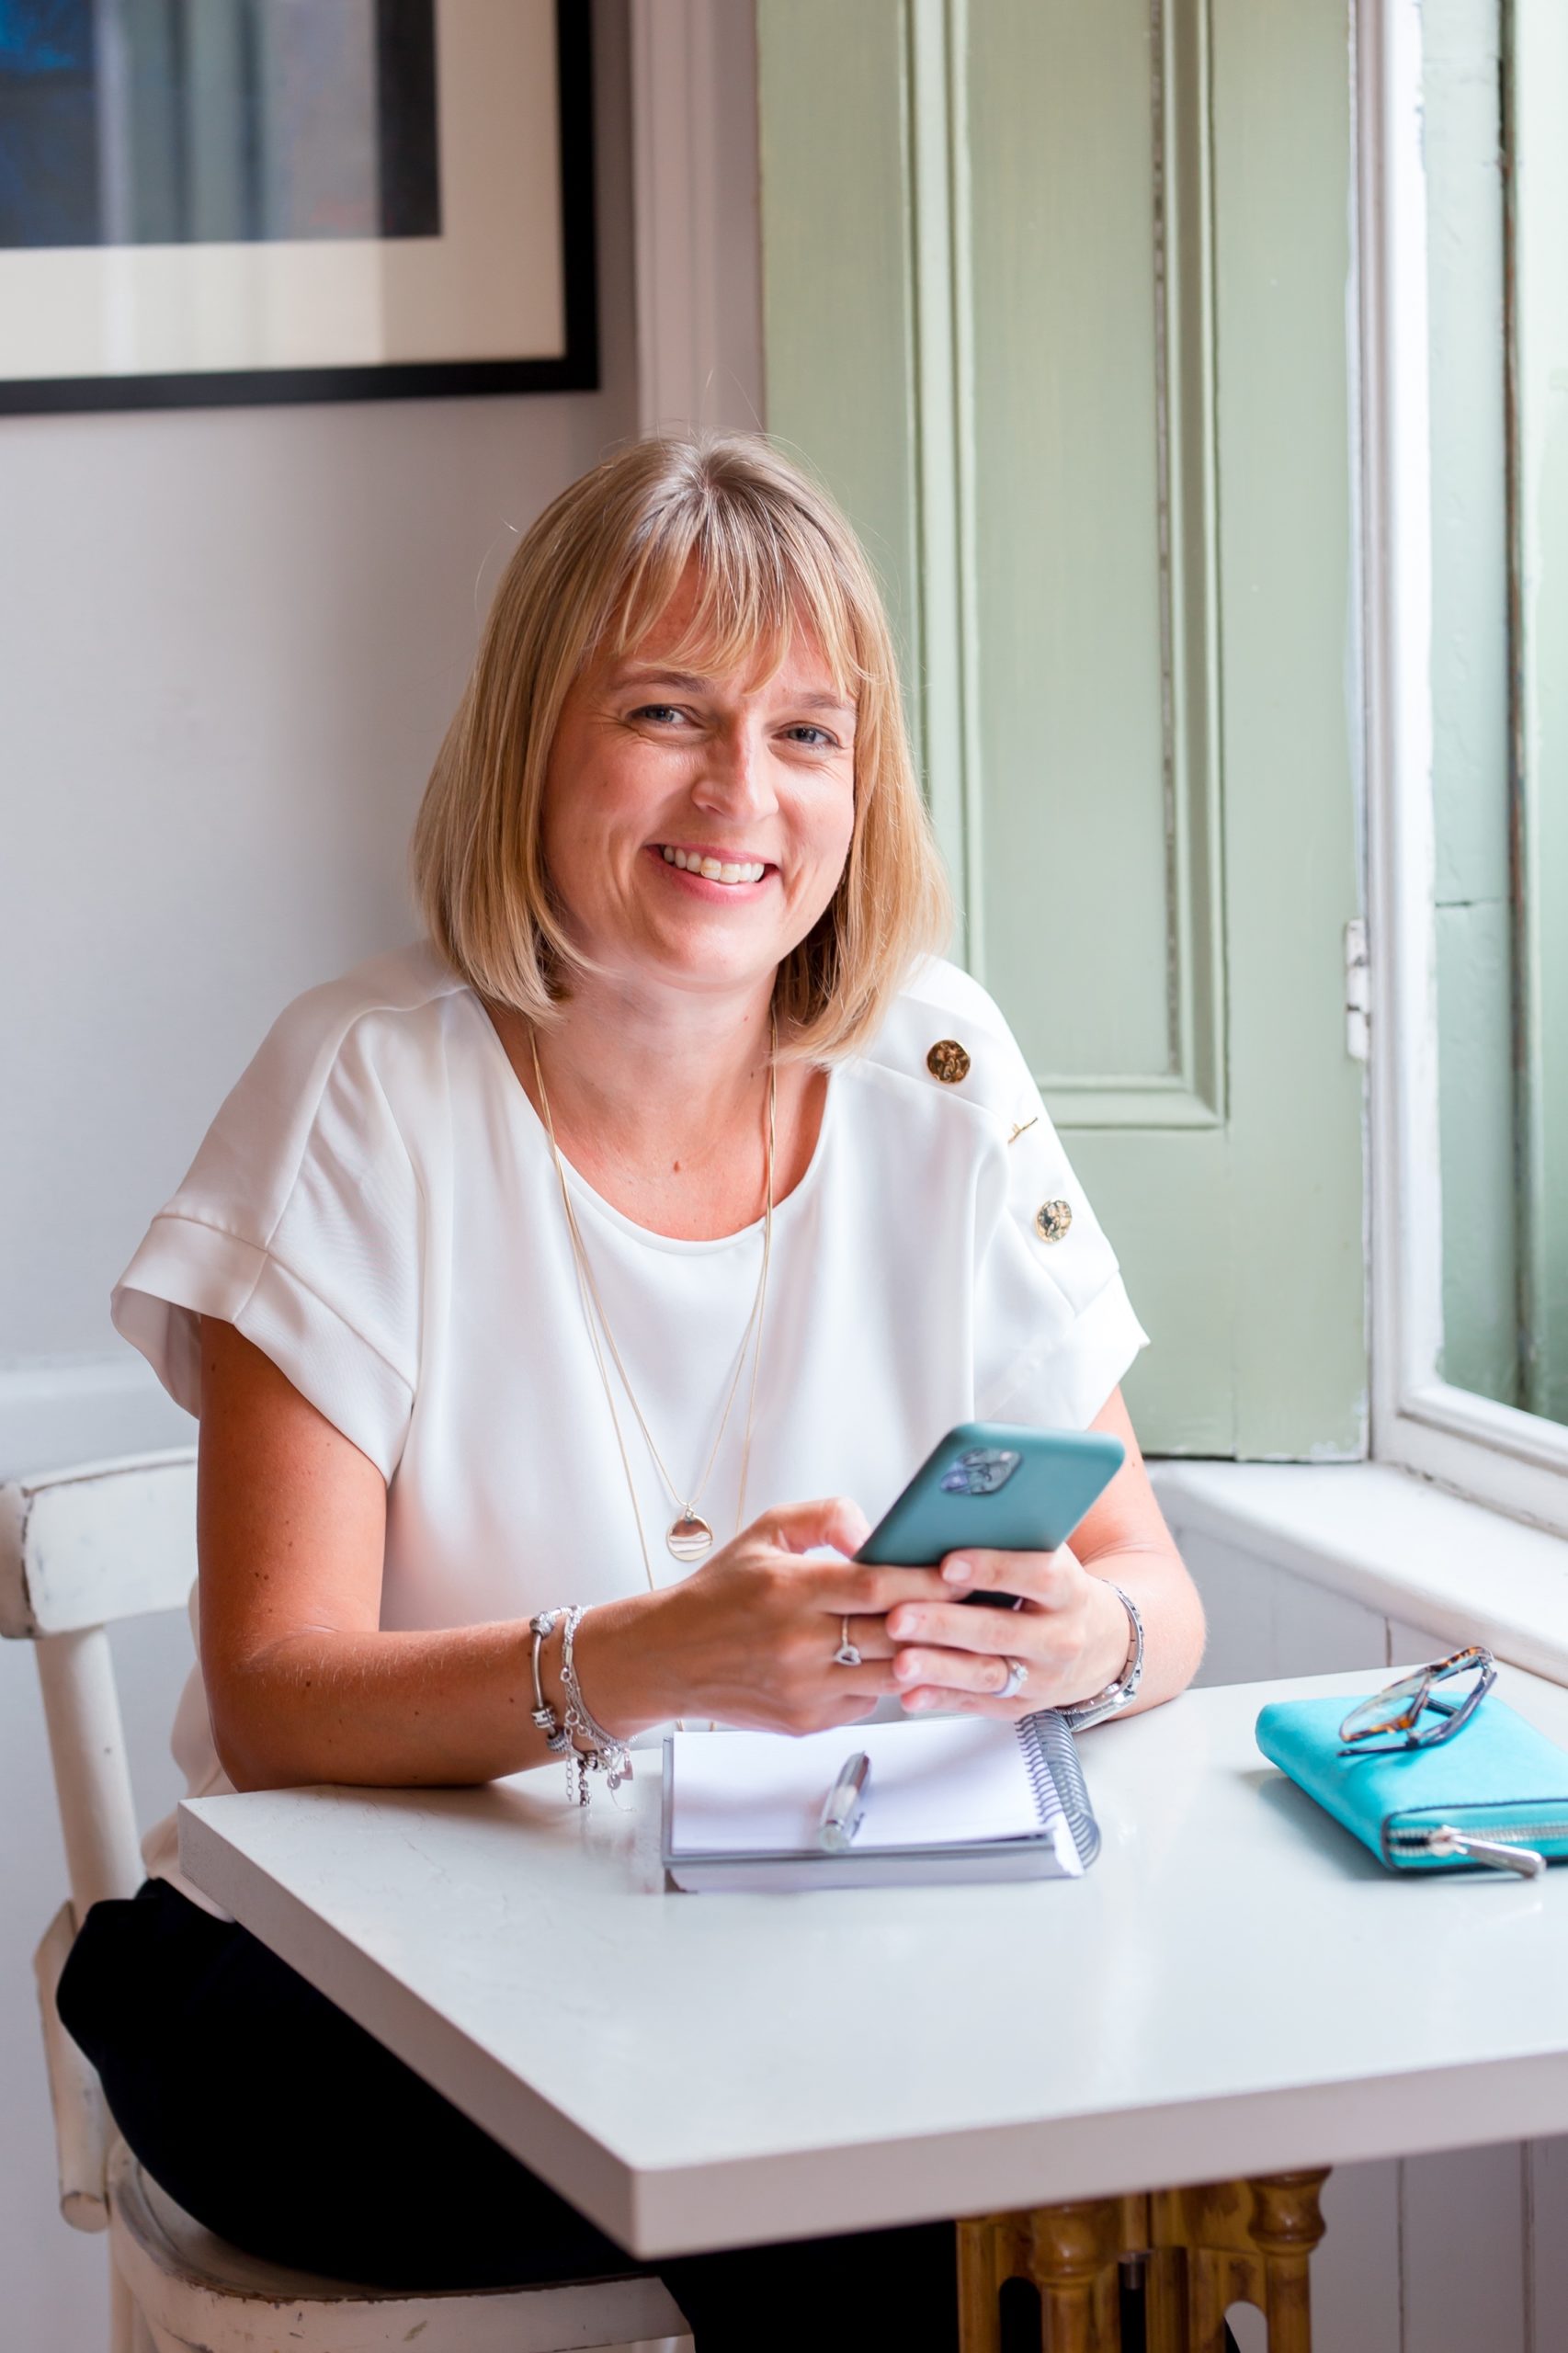 Picture of Emma Boatman, Co-Founder of Boatman Admin Services who offer VA Services in Wiltshire. She's sitting at a table smiling with her phone in hand and a notepad ready to work.